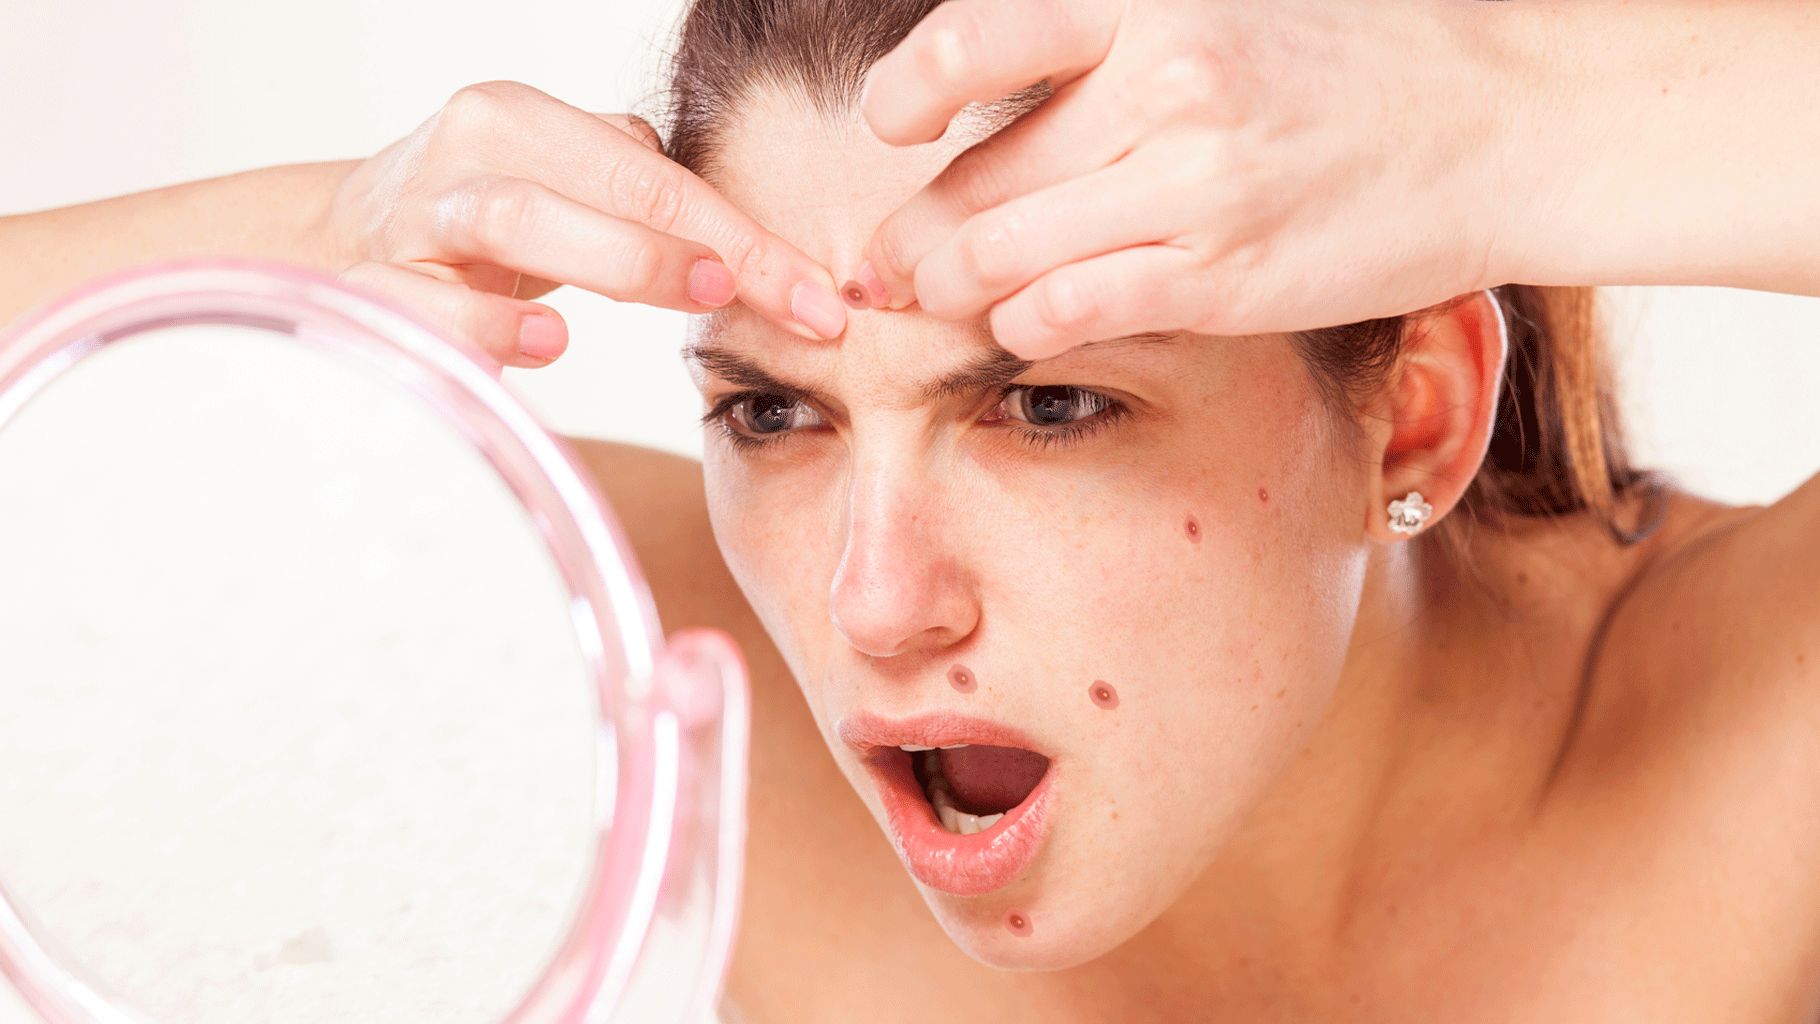 Want to Prevent Recurring Acne? Add These 10 Foods to Your Diet